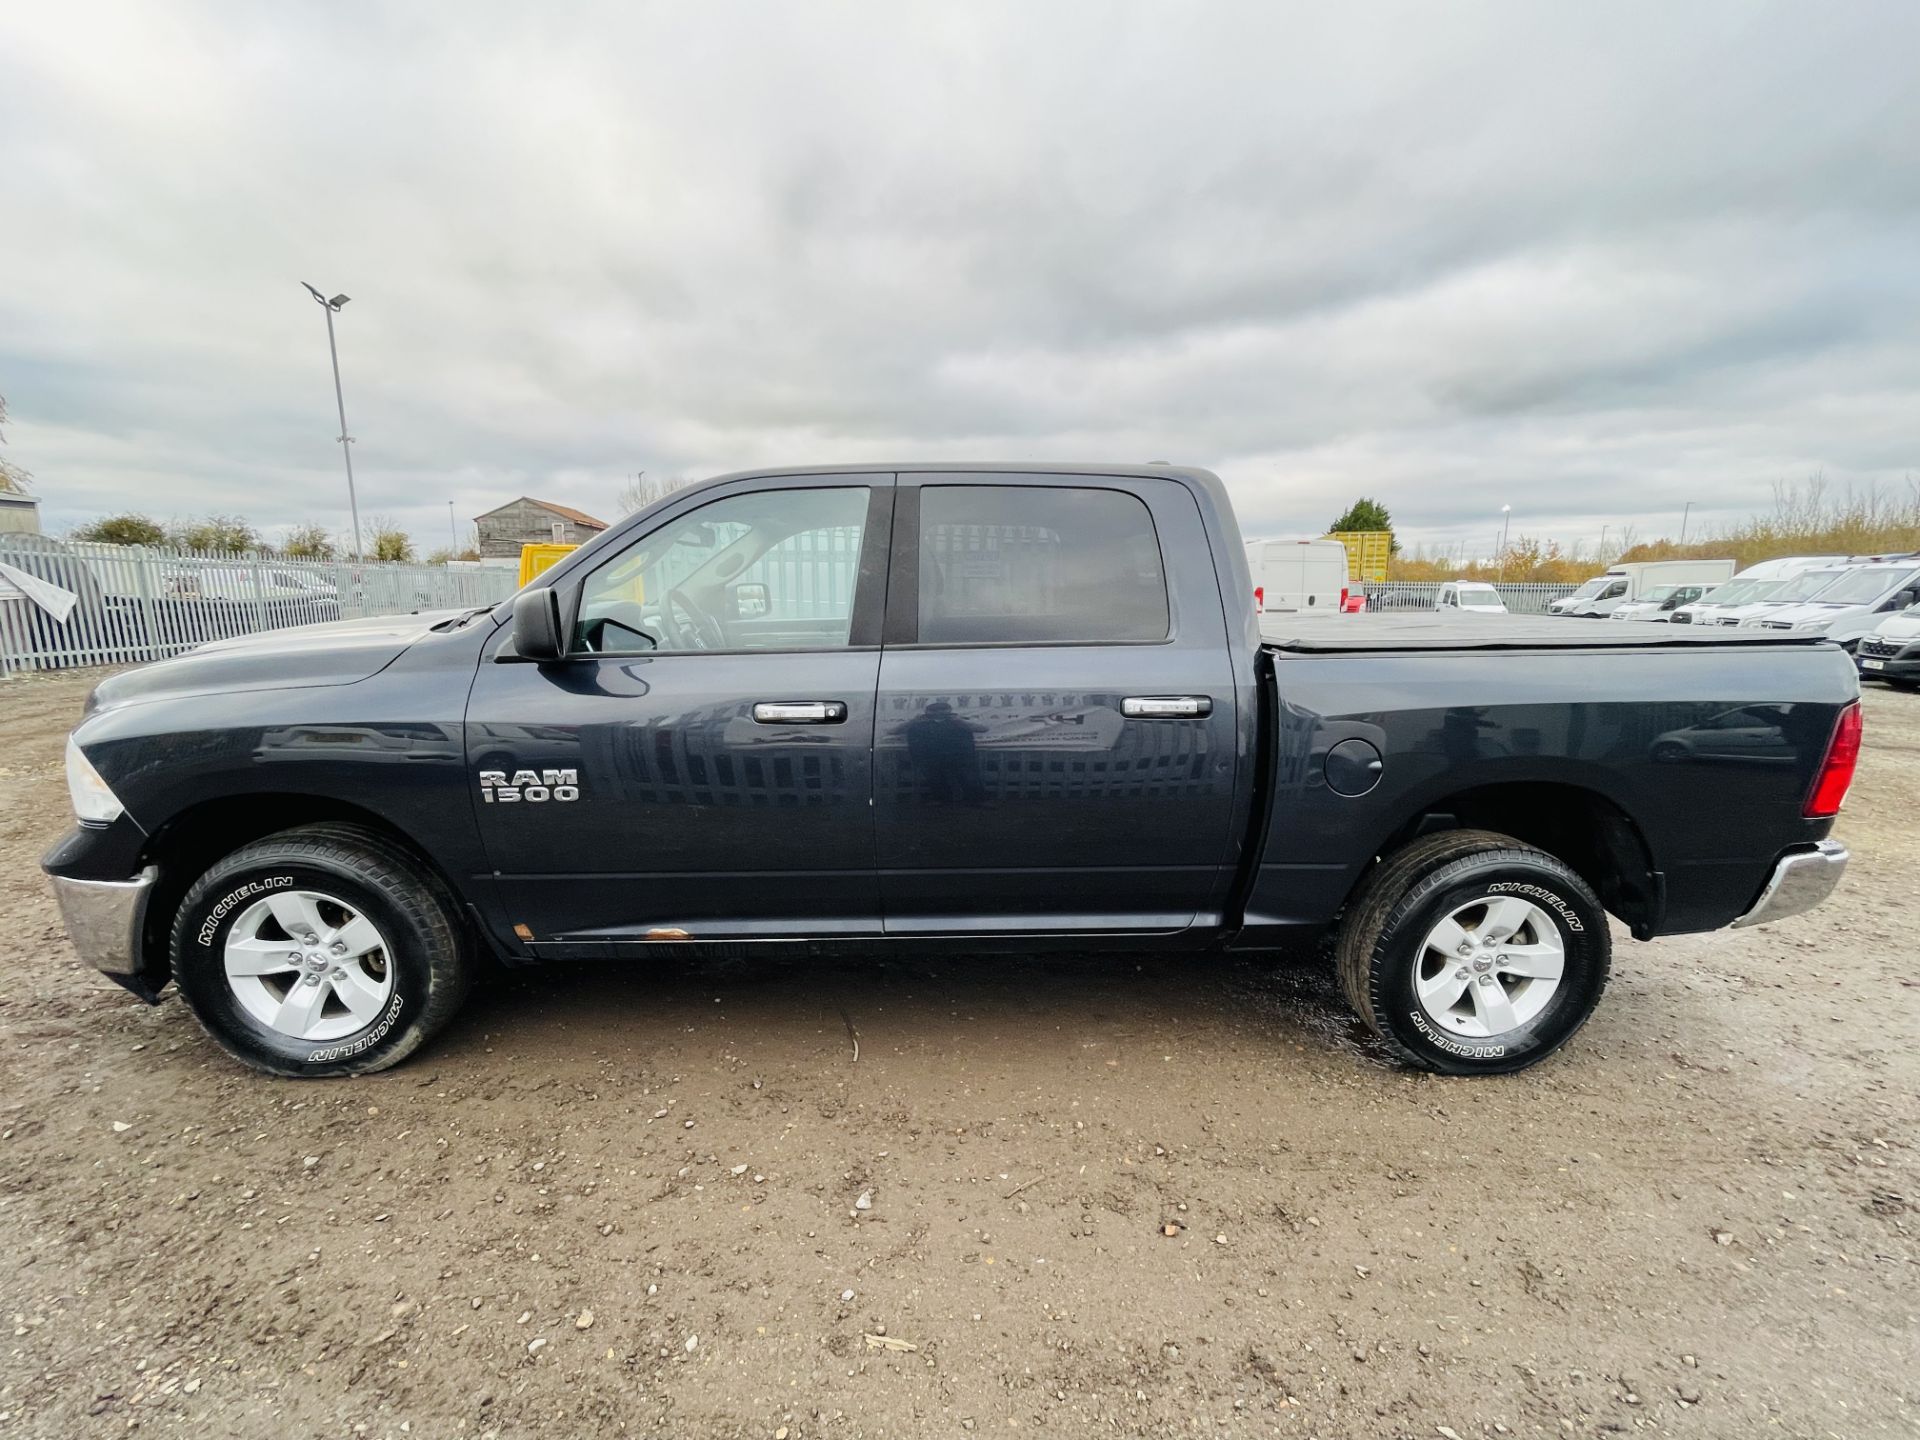 Dodge Ram 3.6 V6 1500 Crew Cab SLT 4WD ' 2015 Year ' A/C - 6 Seats - Chrome Package - Image 4 of 21